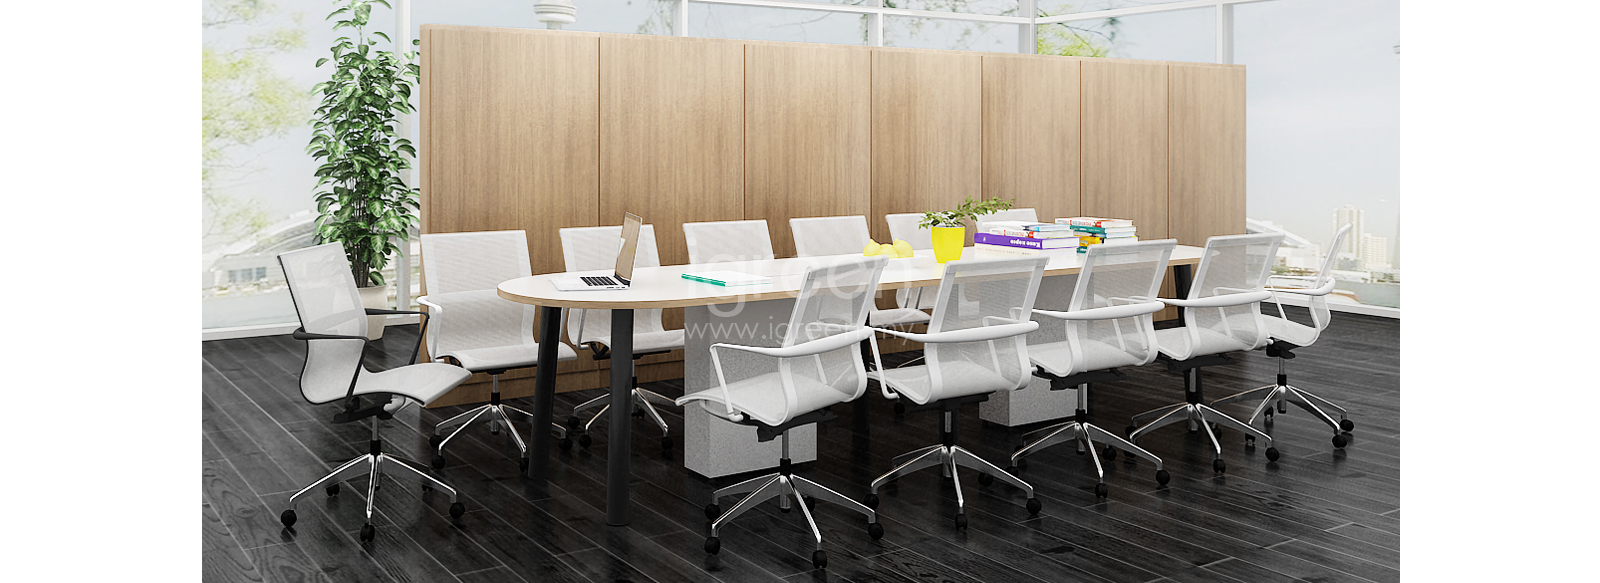 Been Series Design Concept Oval Meeting Table